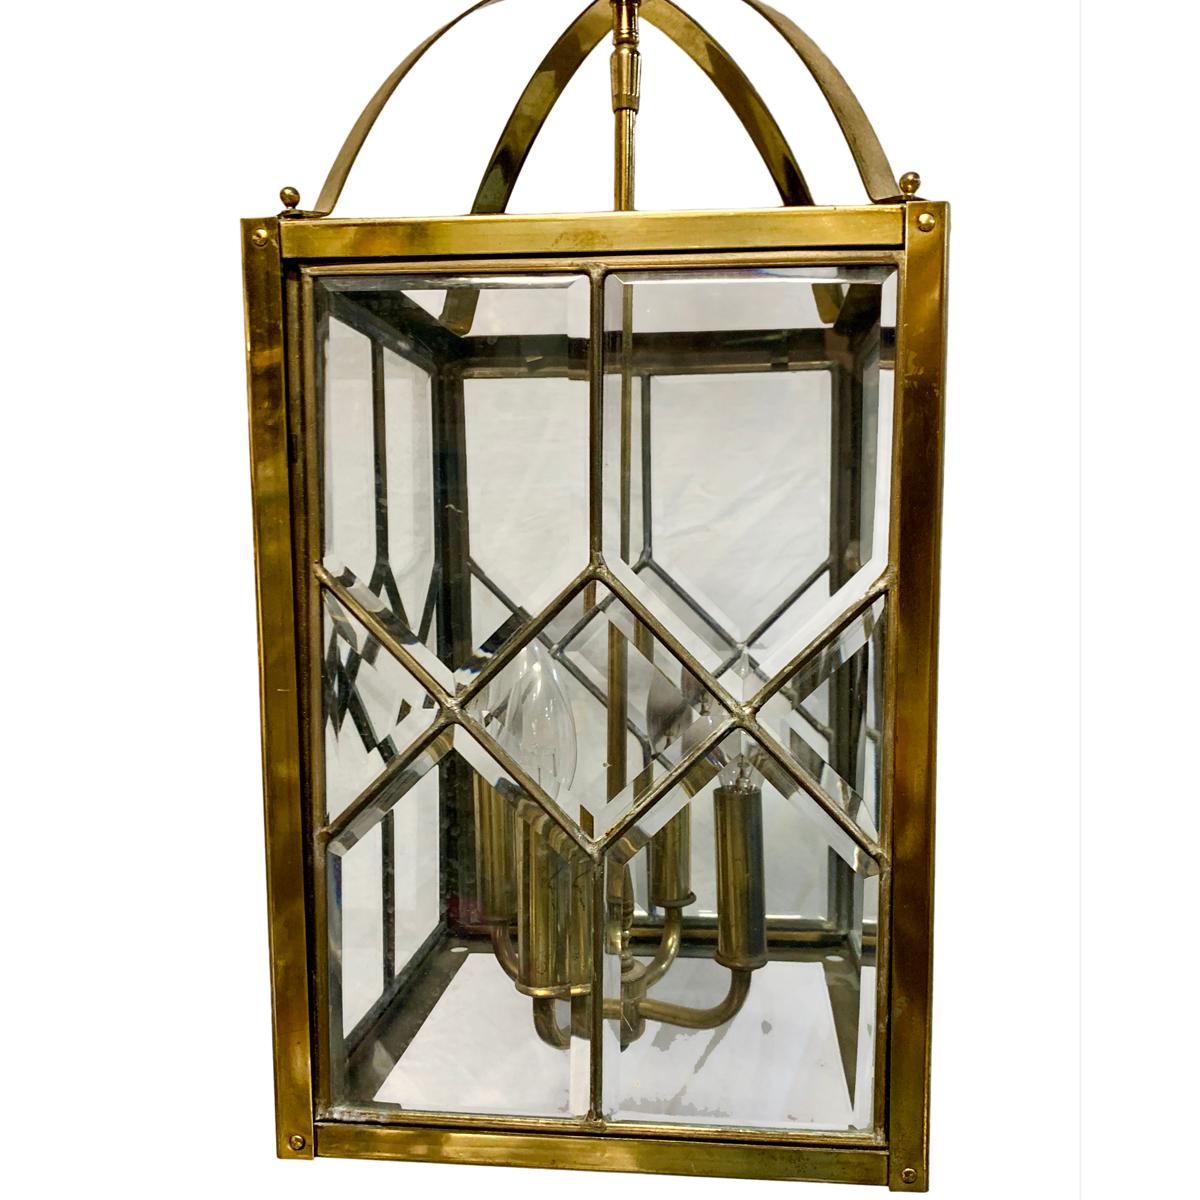 A circa 1960s Italian gilt bronze lantern with beveled glass insets.

Measurements:
Drop 25